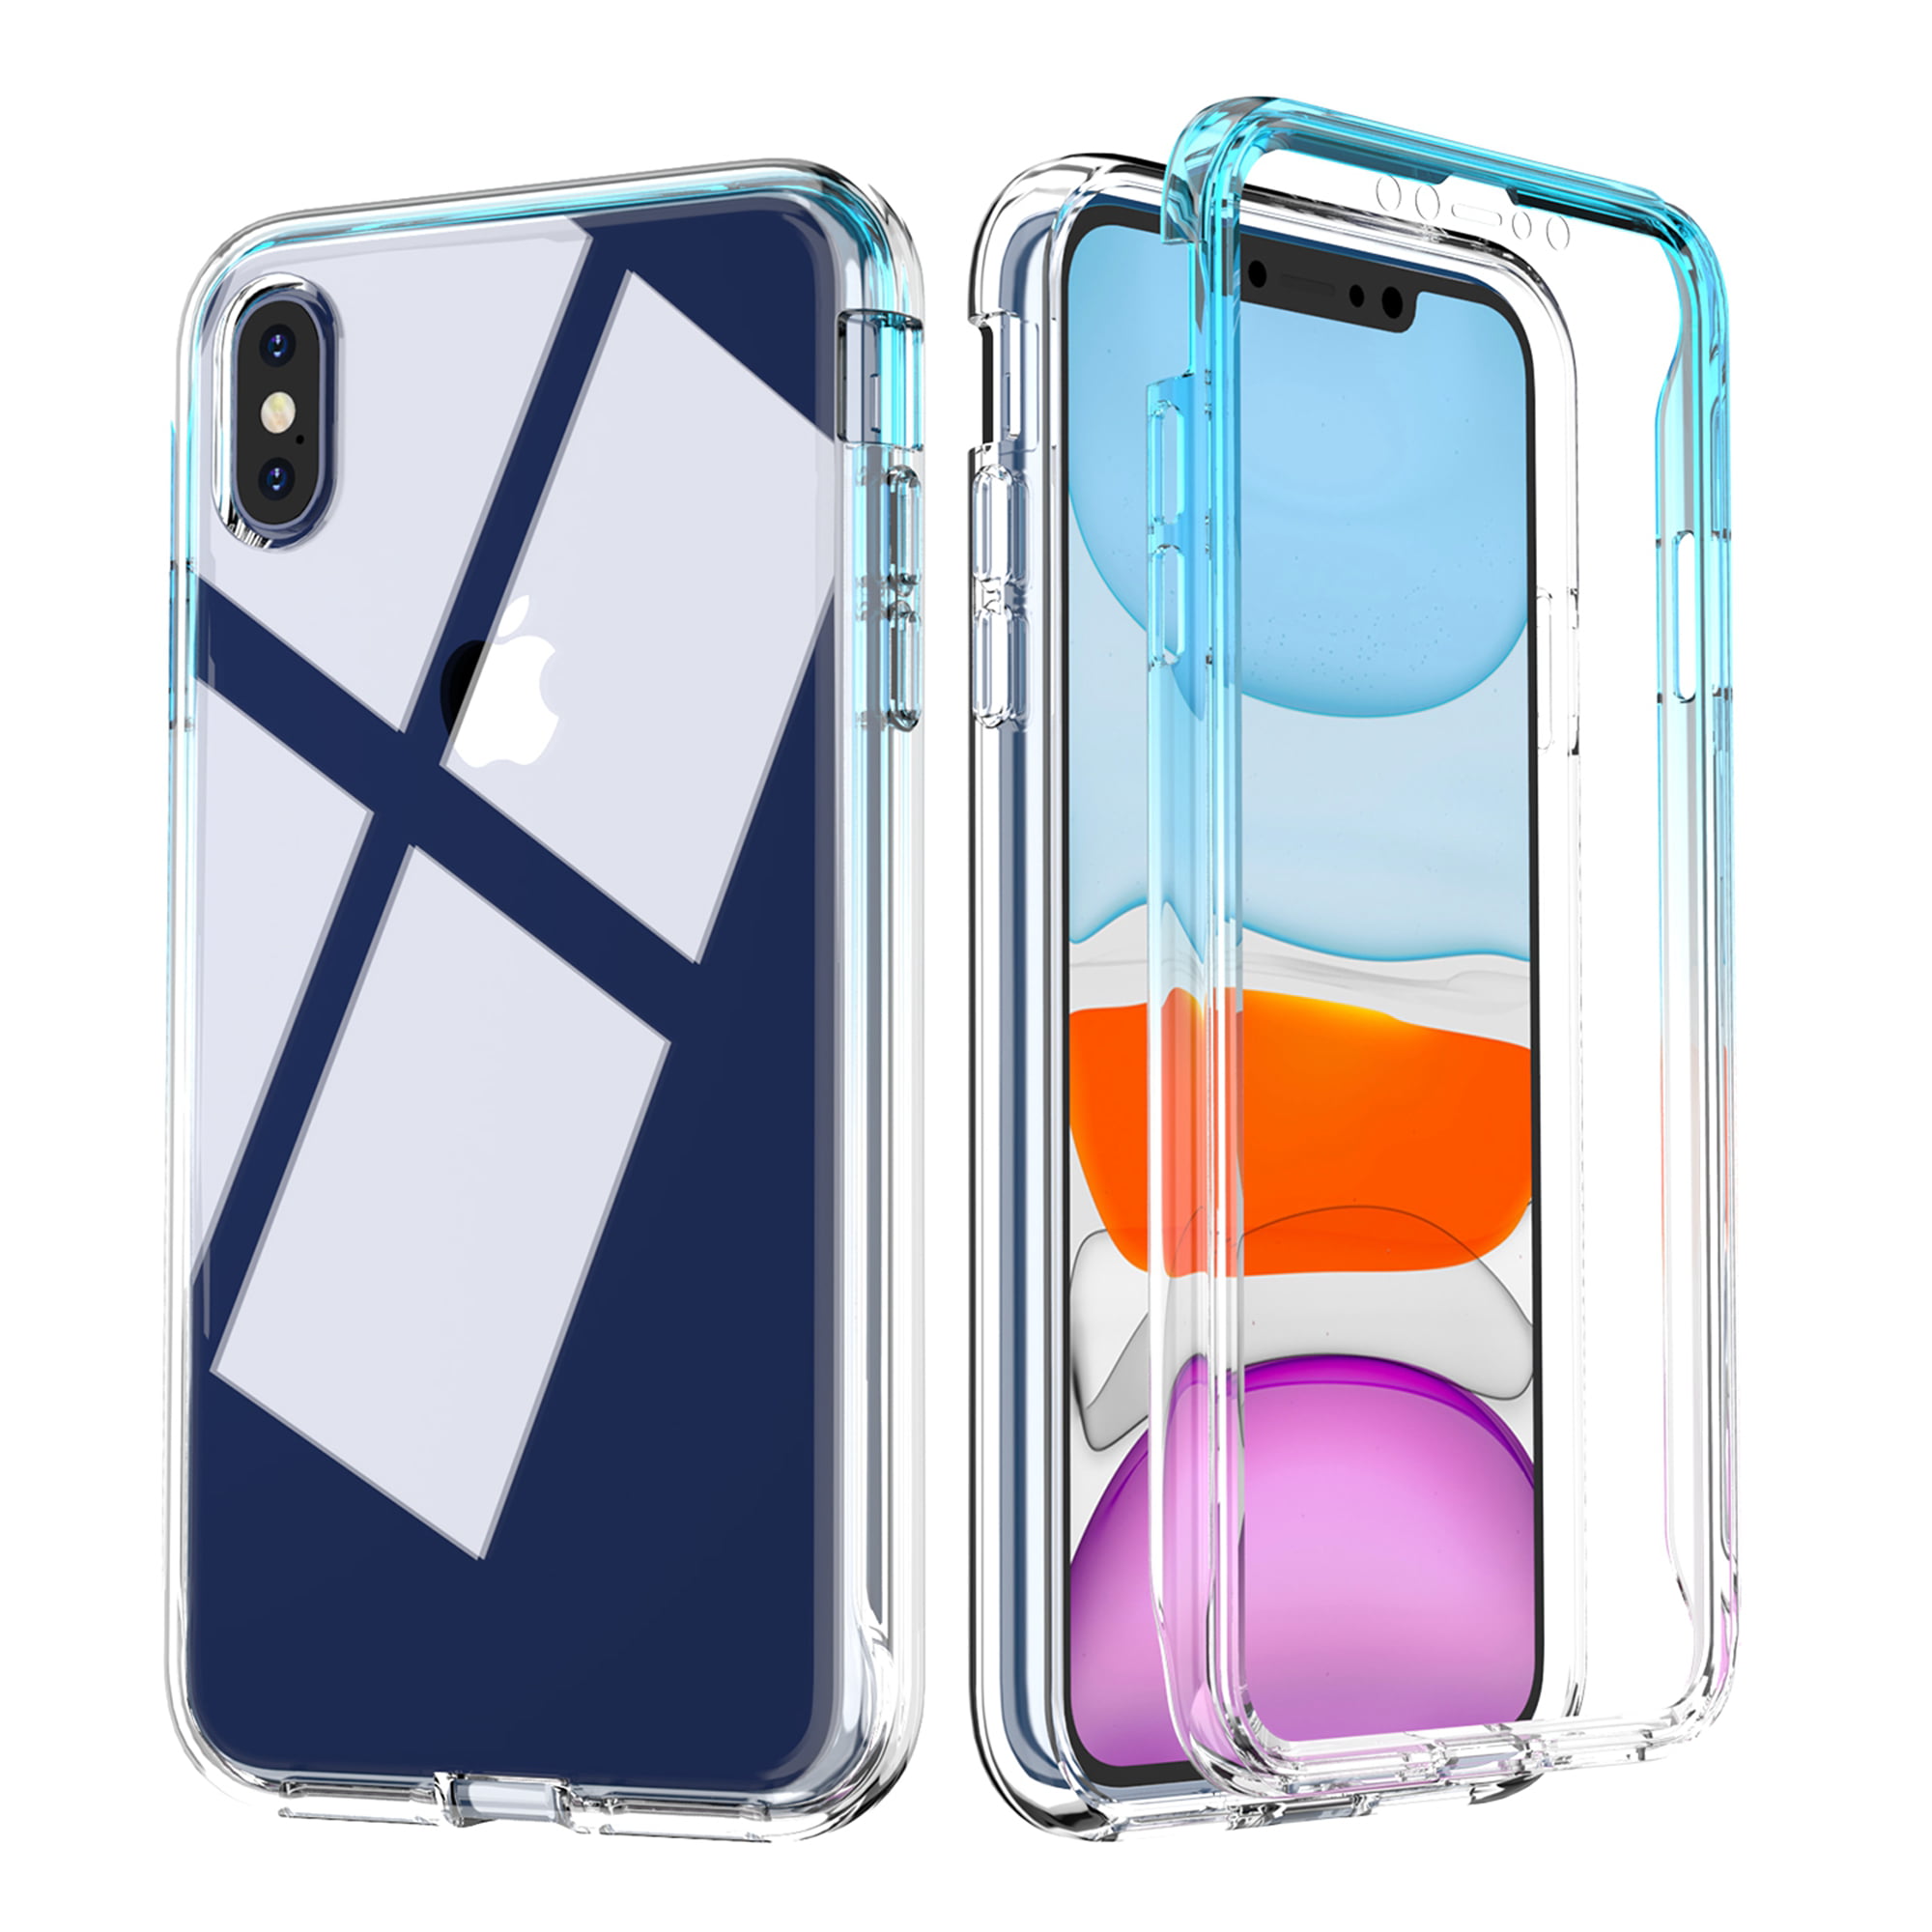 cyklus handling Blive ved iPhone XS Max Case with Built-in Screen Protector, Dteck Full Body  Shockproof Dual Layer High Impact Protective Anti-Scratch Soft TPU Cover  Cases Compatible With iPhone XS Max, Purple + Blue - Walmart.com